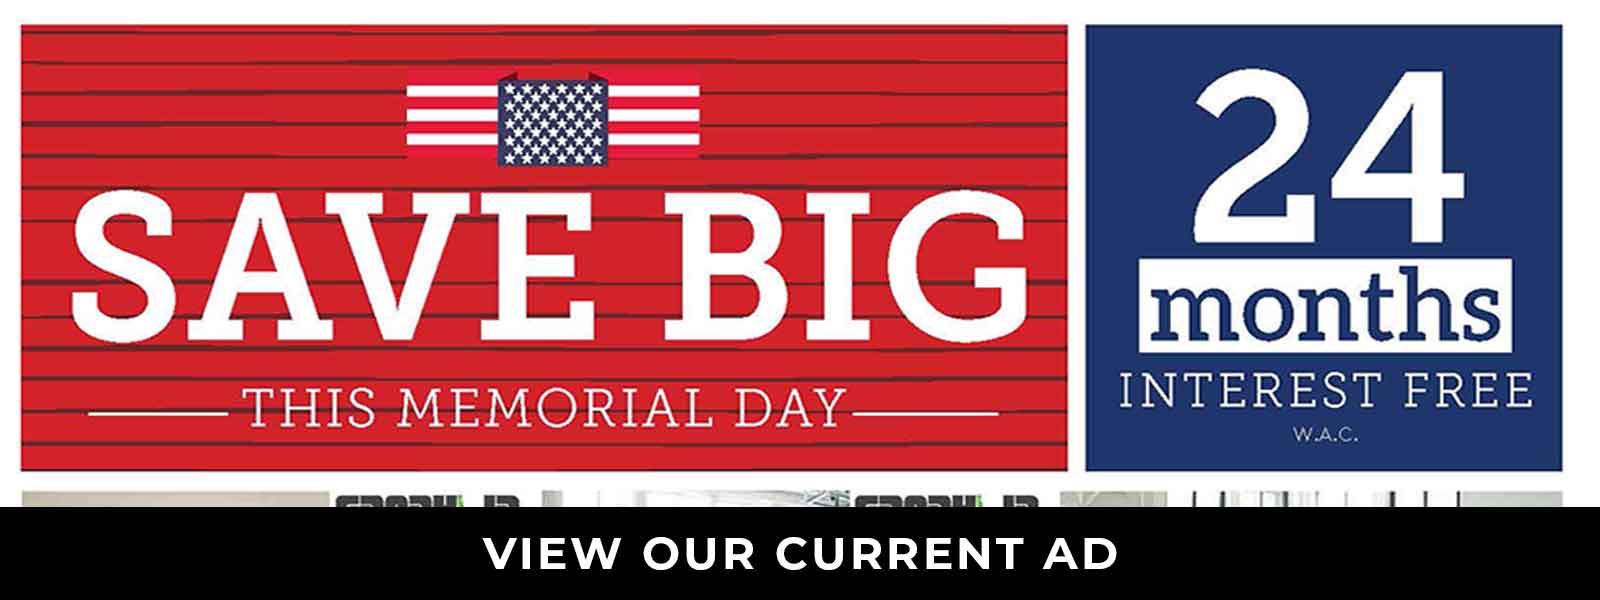 Save Big on Memorial Day